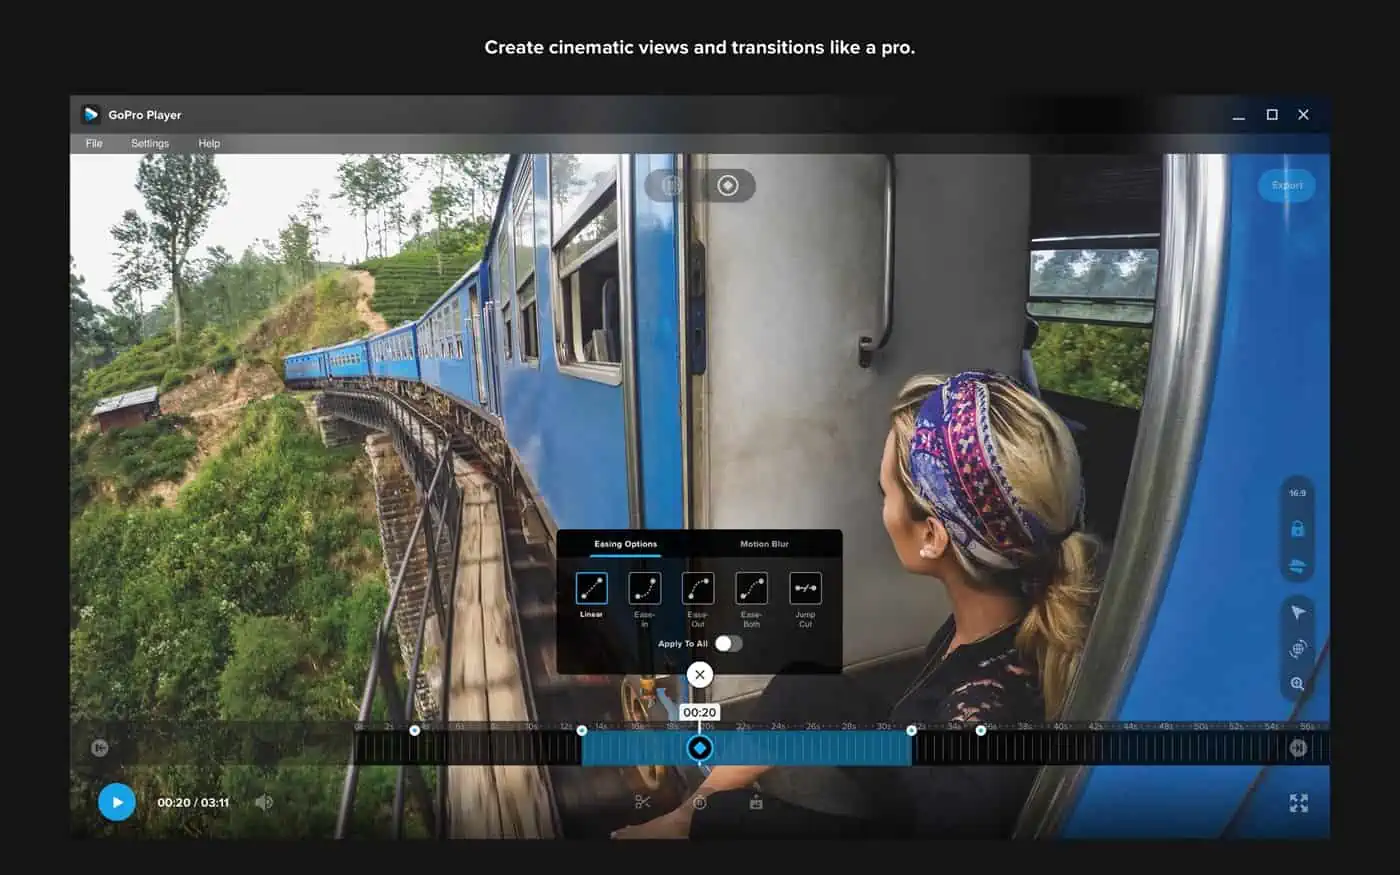 gopro application for windows